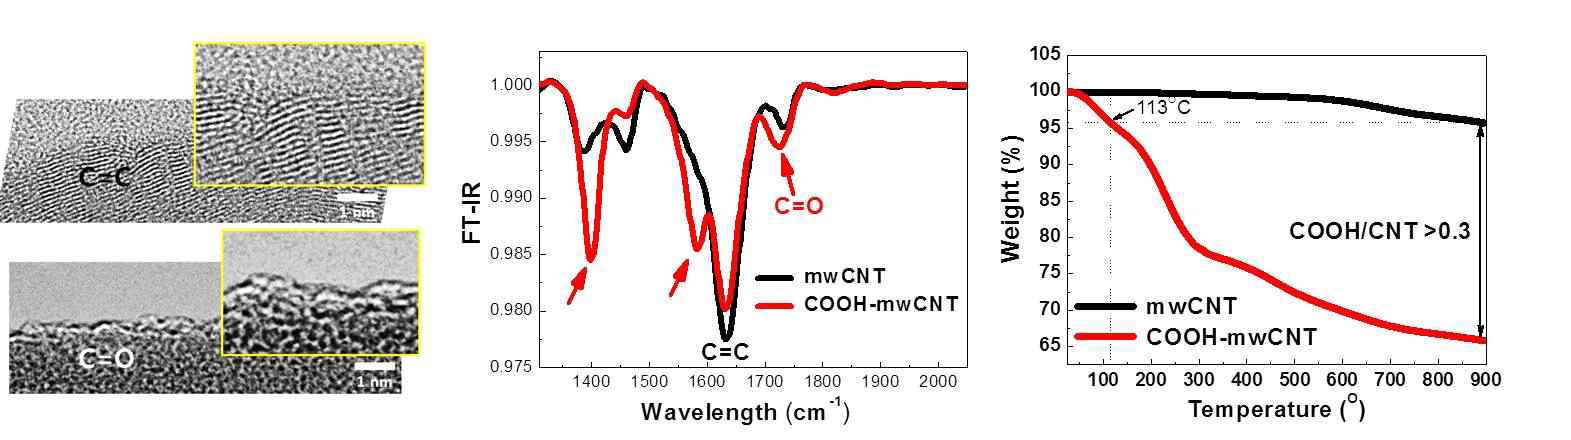 Oxide maximization of CNT: Change of surface chemistry and weight.